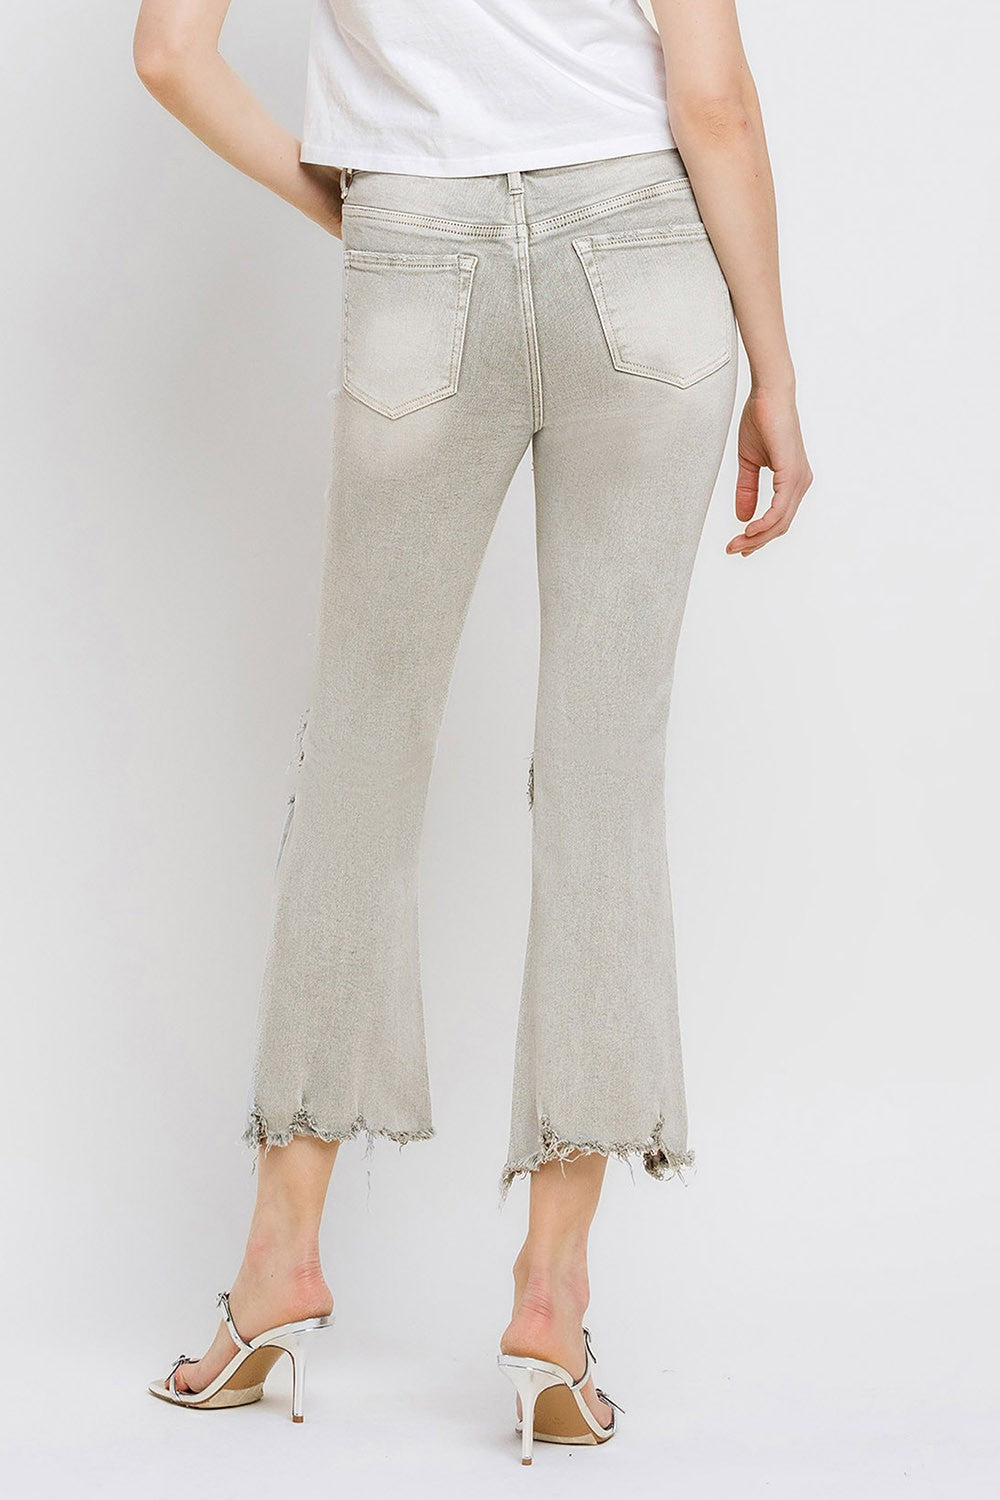 These distressed raw hem cropped flare jeans offer a perfect blend of edgy and retro style. The distressed detailing adds a touch of urban flair to the flared silhouette. The raw hem finishes off the look with a trendy, unfinished edge. Pair these jeans with a tucked-in graphic tee and platform sandals for a vintage-inspired outfit. 